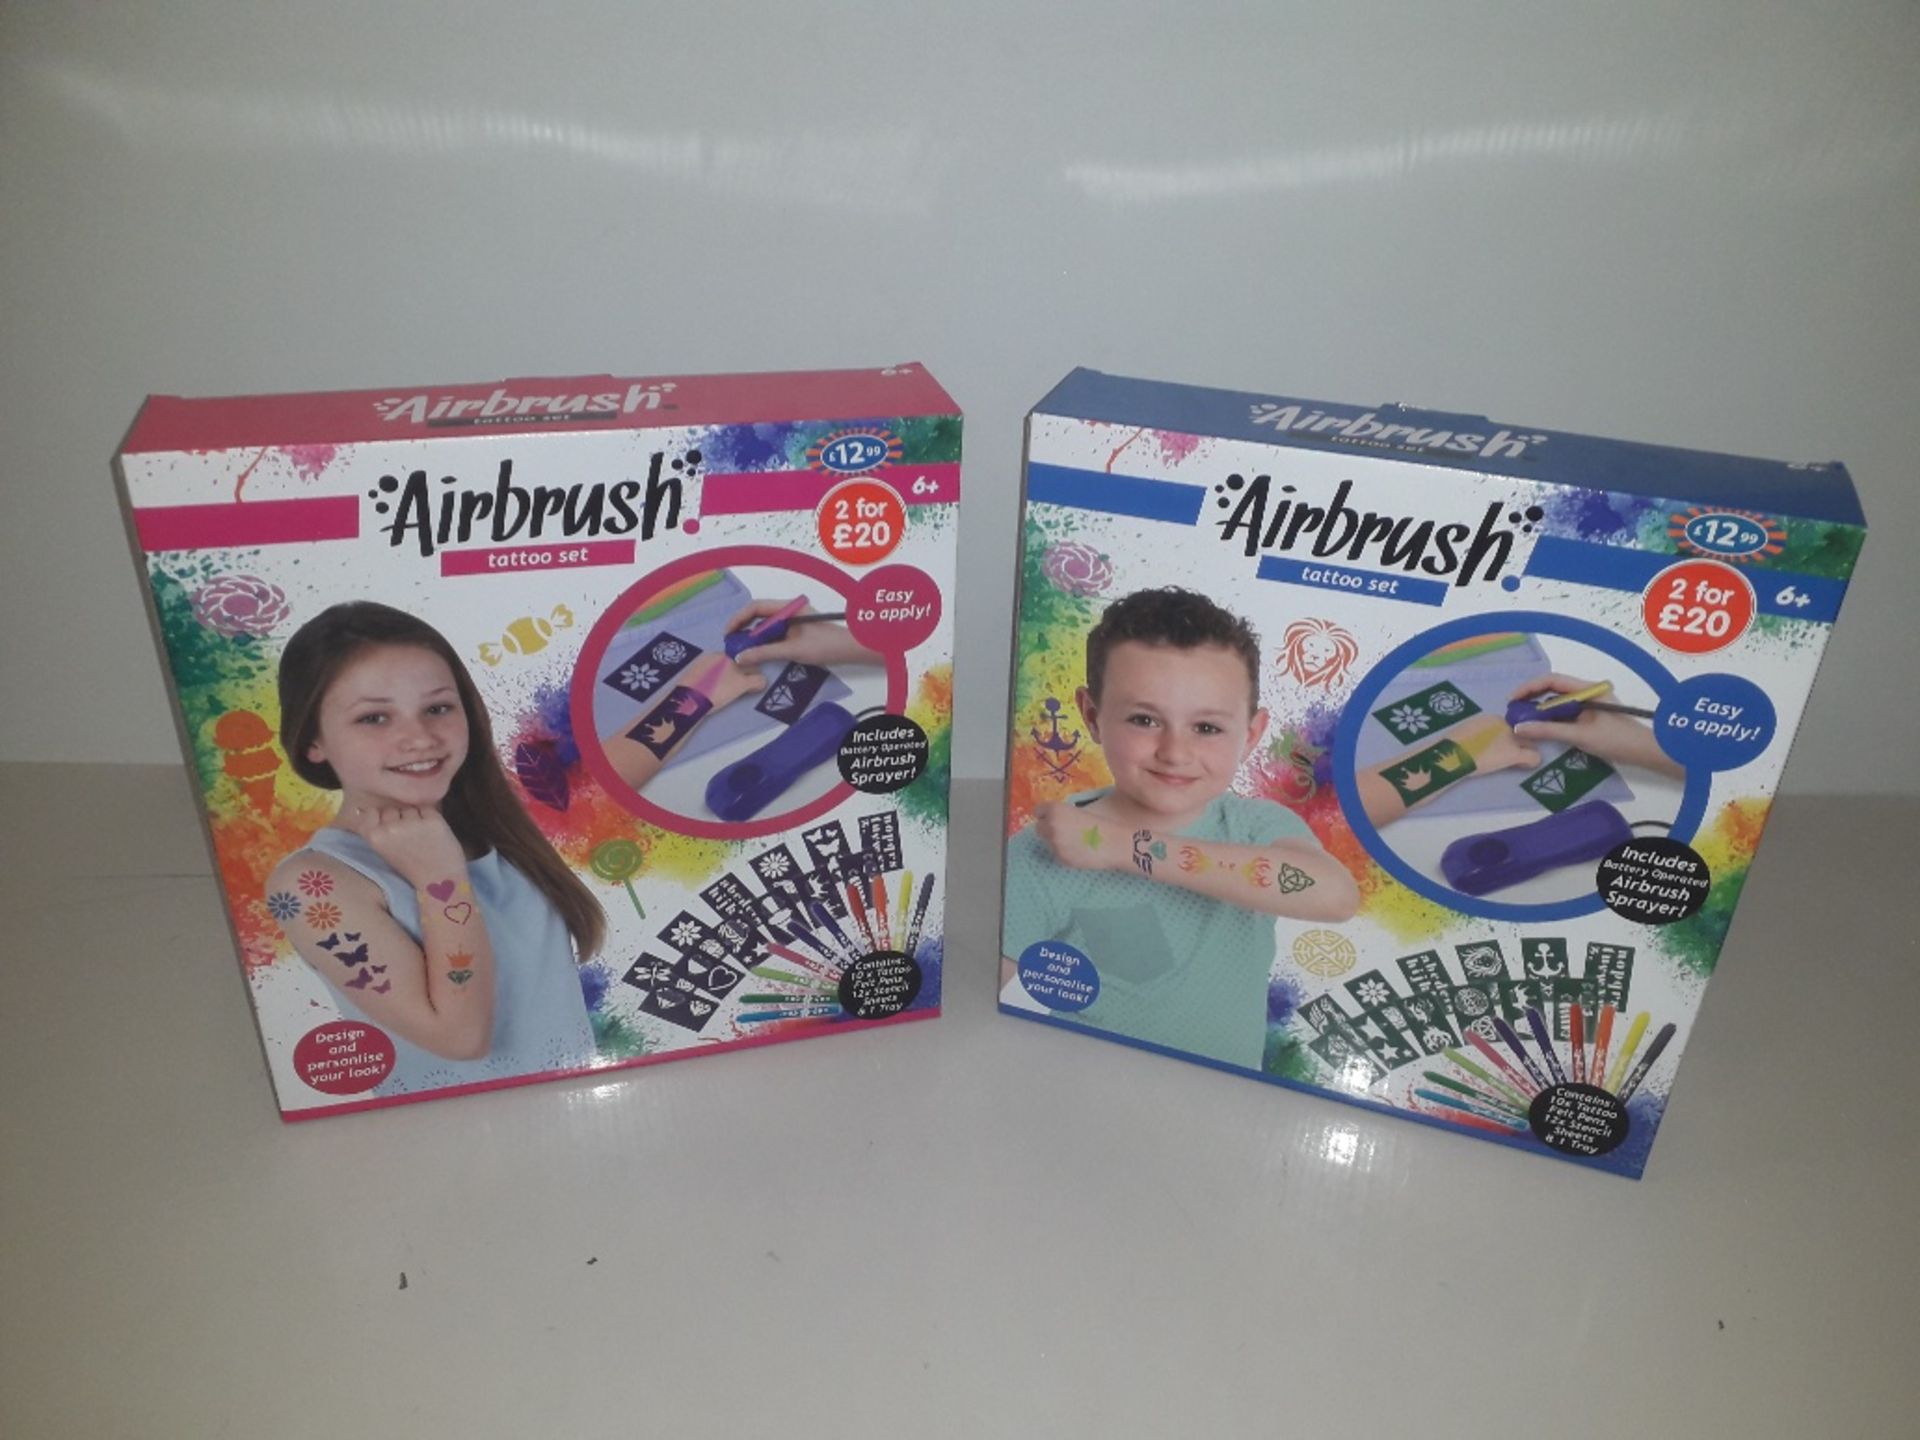 24 X BRAND NEW BOXED AIRBRUSH TATTOO SET IN ASSORTED BOYS/GIRLS, INCLUDES BATTERY OPERATED